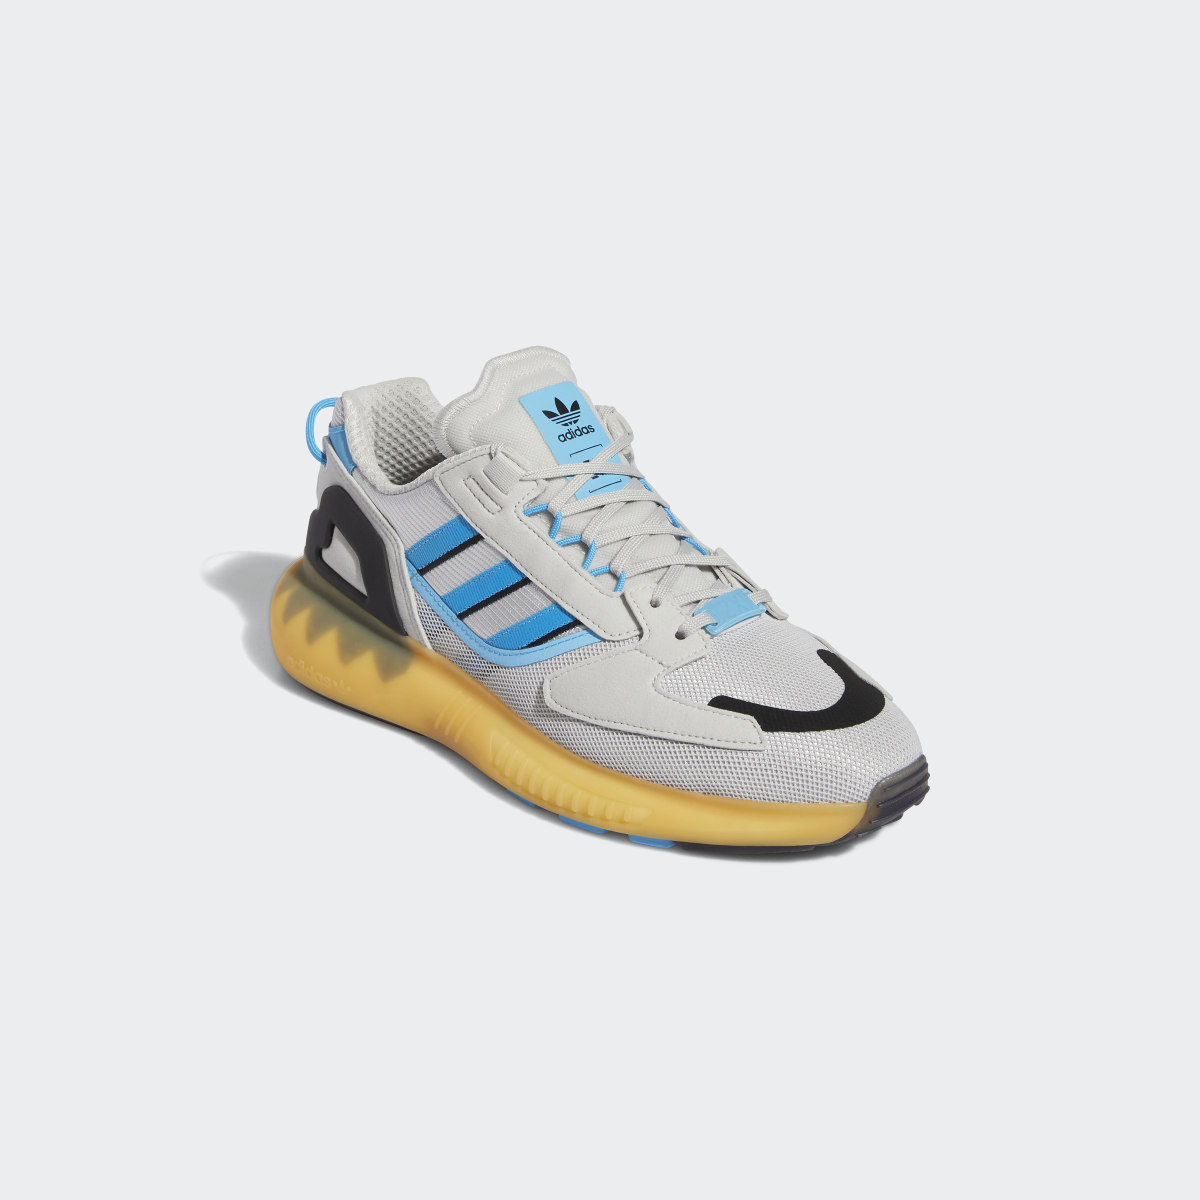 Adidas ZX 5K Boost Shoes. 5